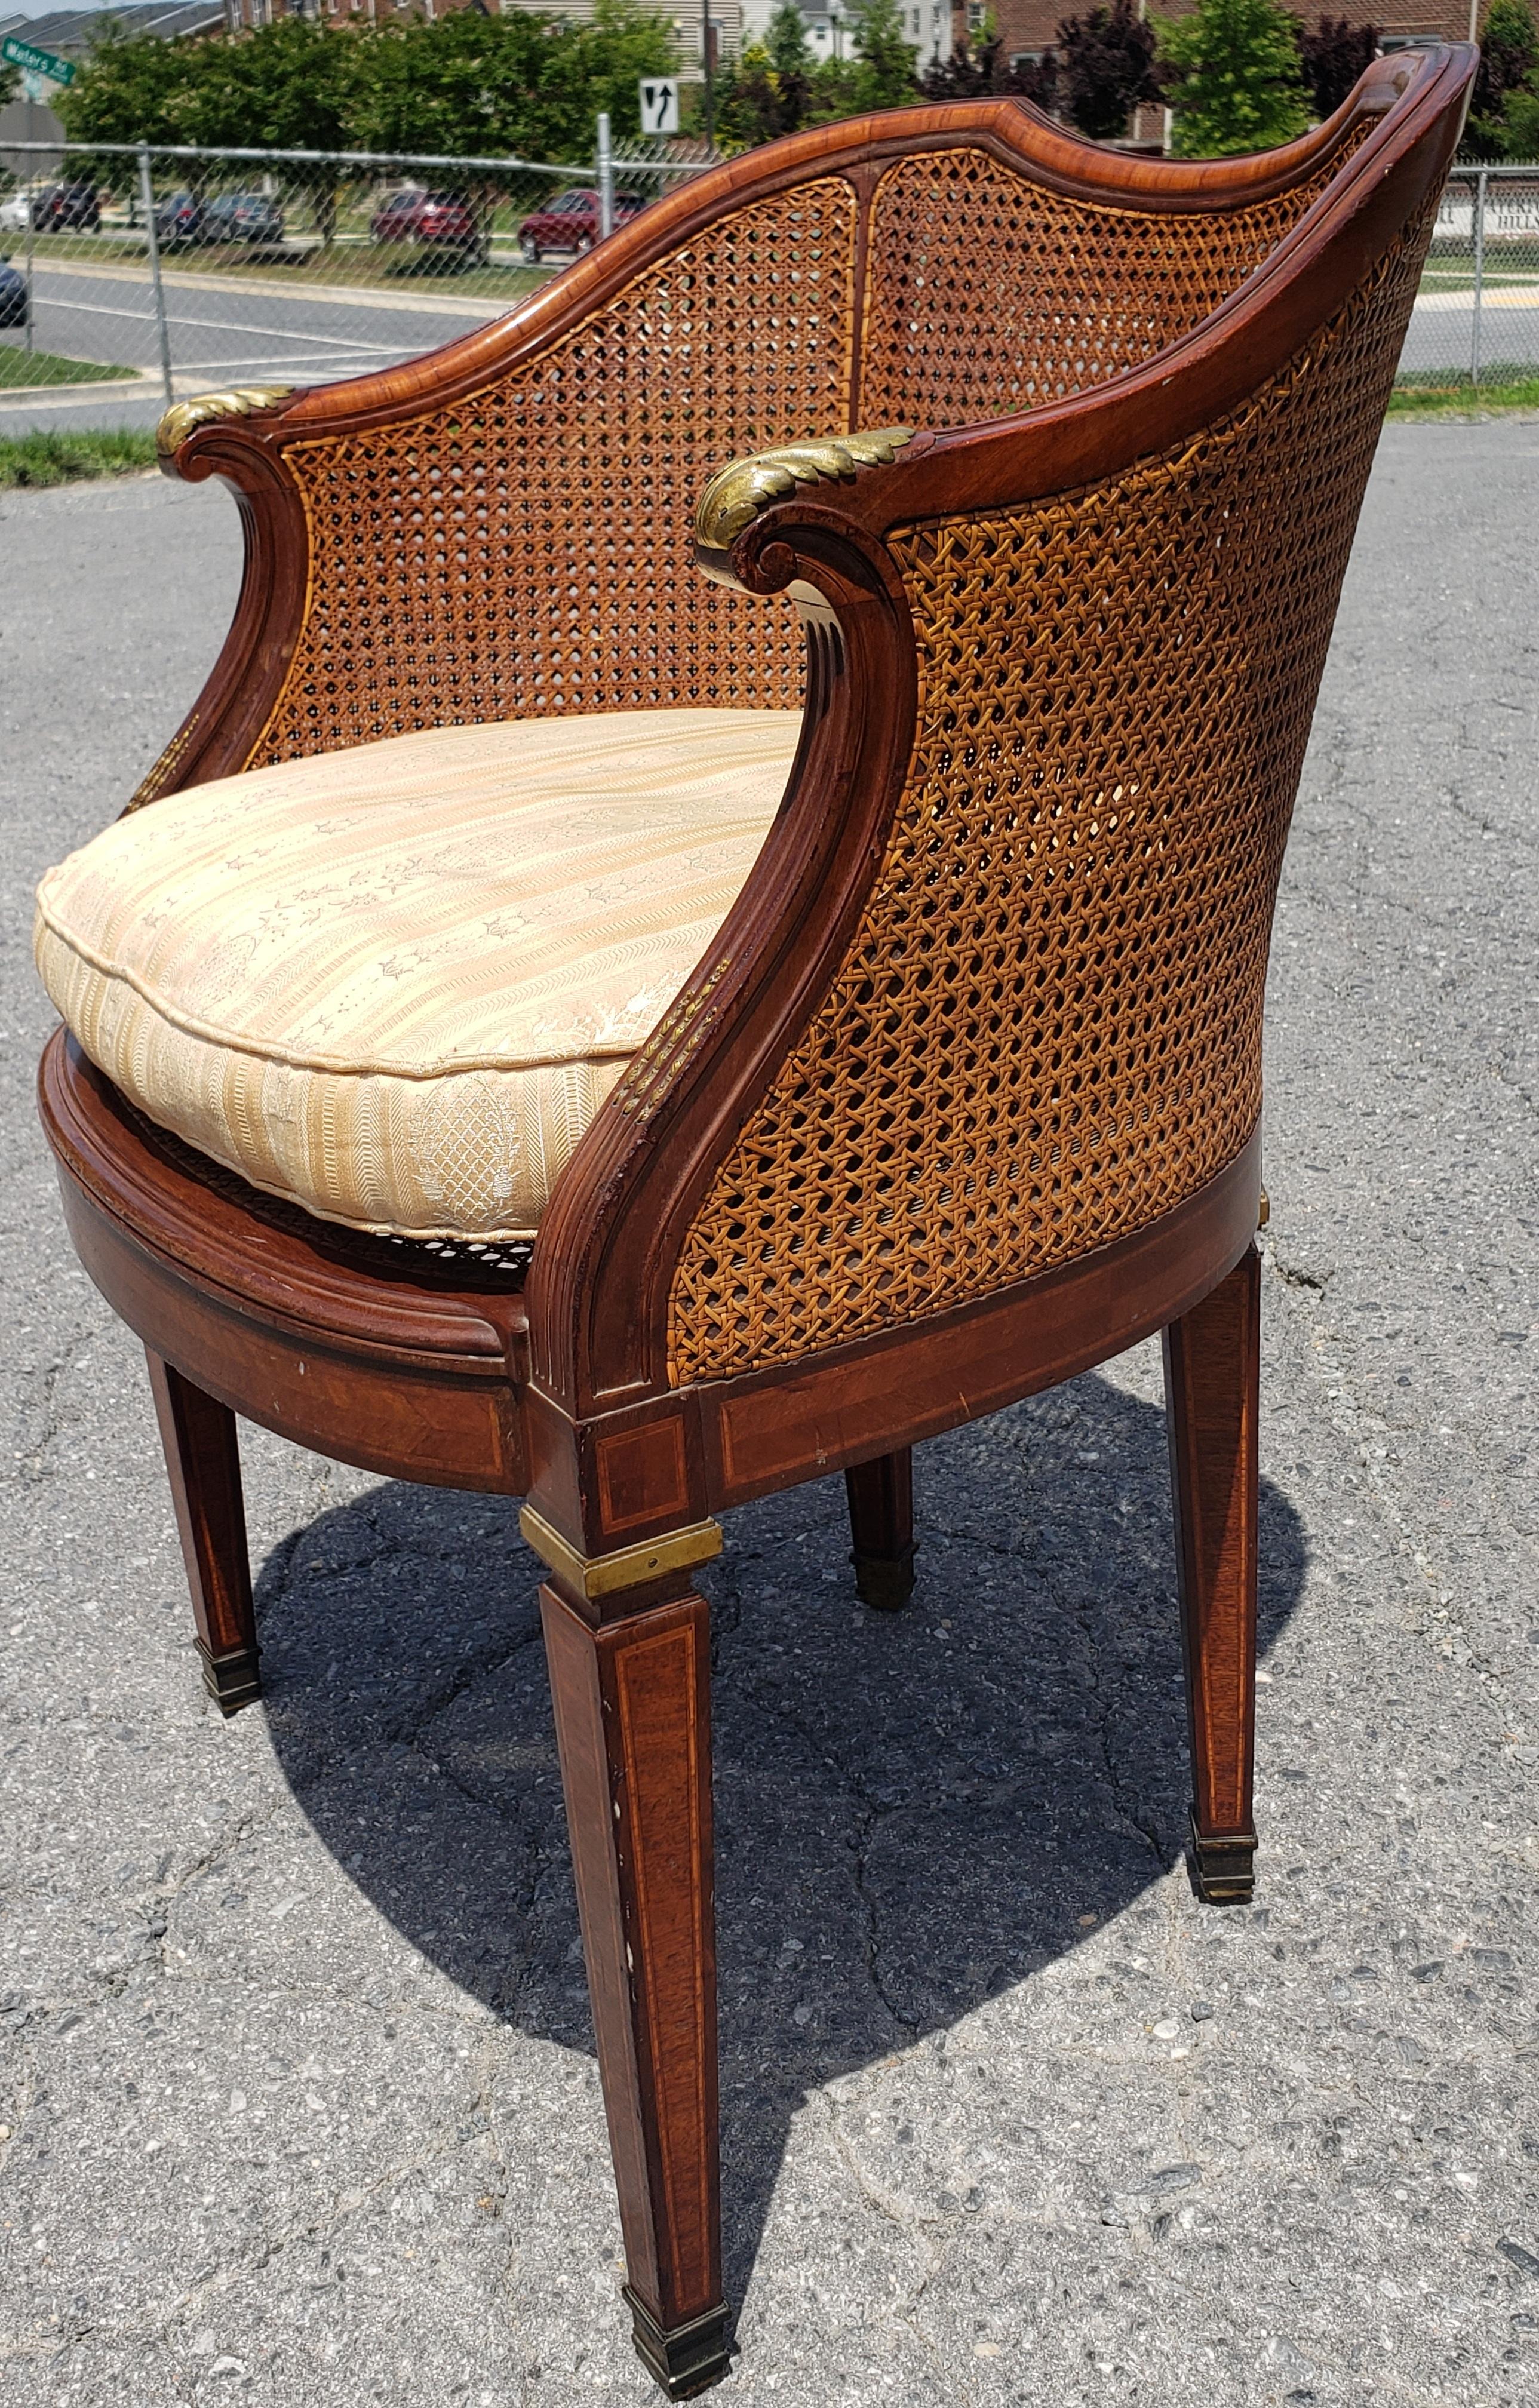 Louis XV Transitional Mahogany and Kingwood Marquetry Burl and Cane Barrel Chair In Good Condition For Sale In Germantown, MD